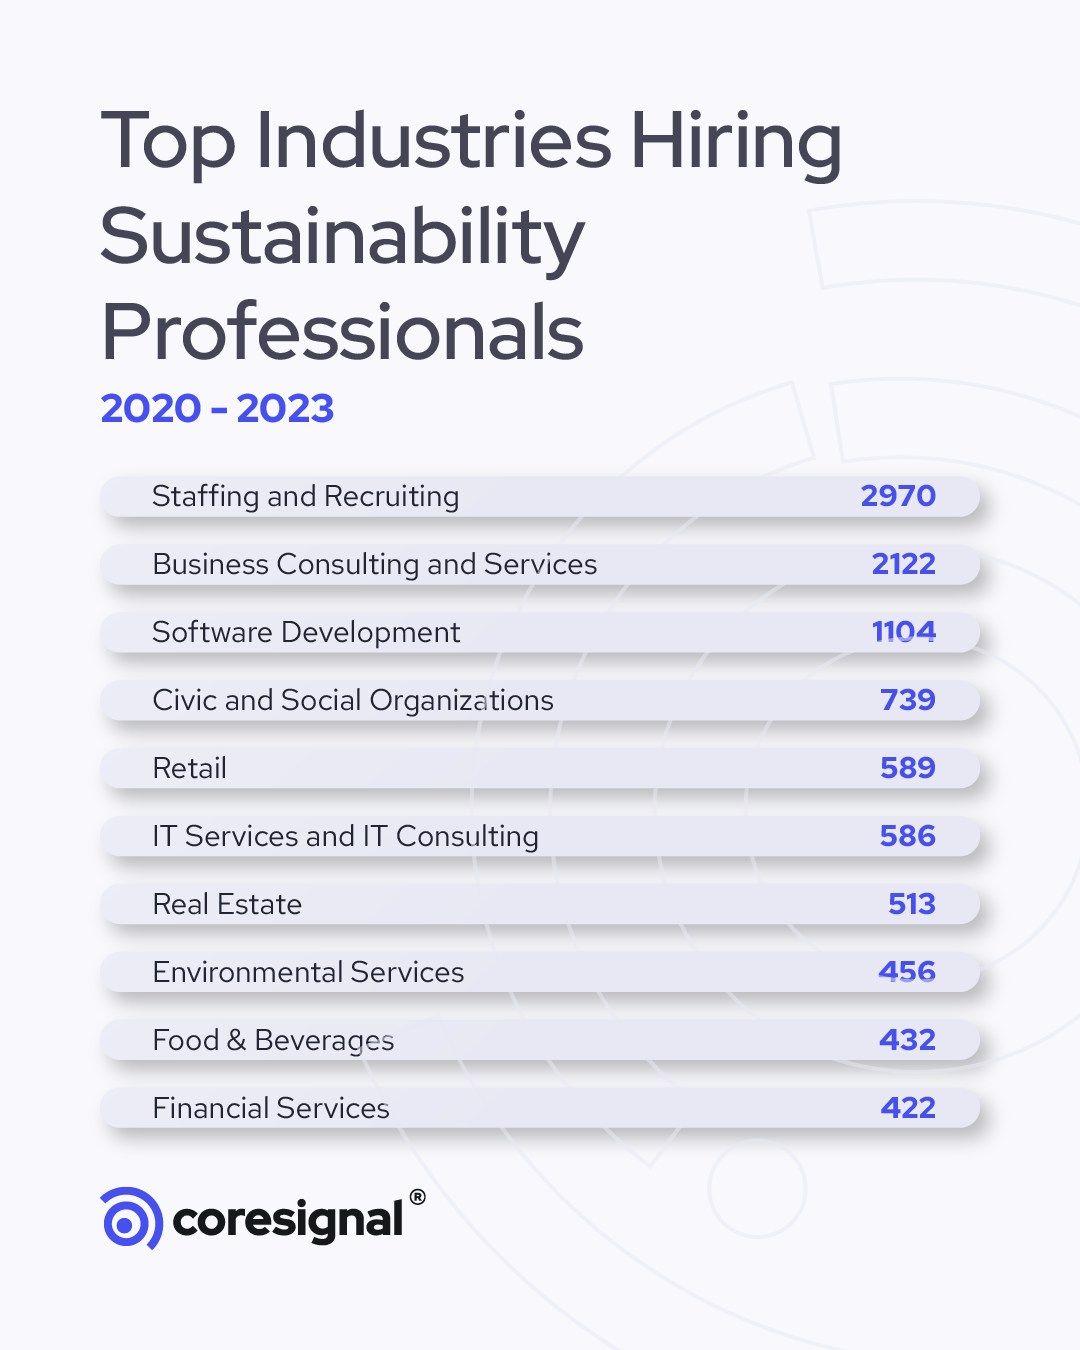 Top industries hiring sustainability specialists over the years